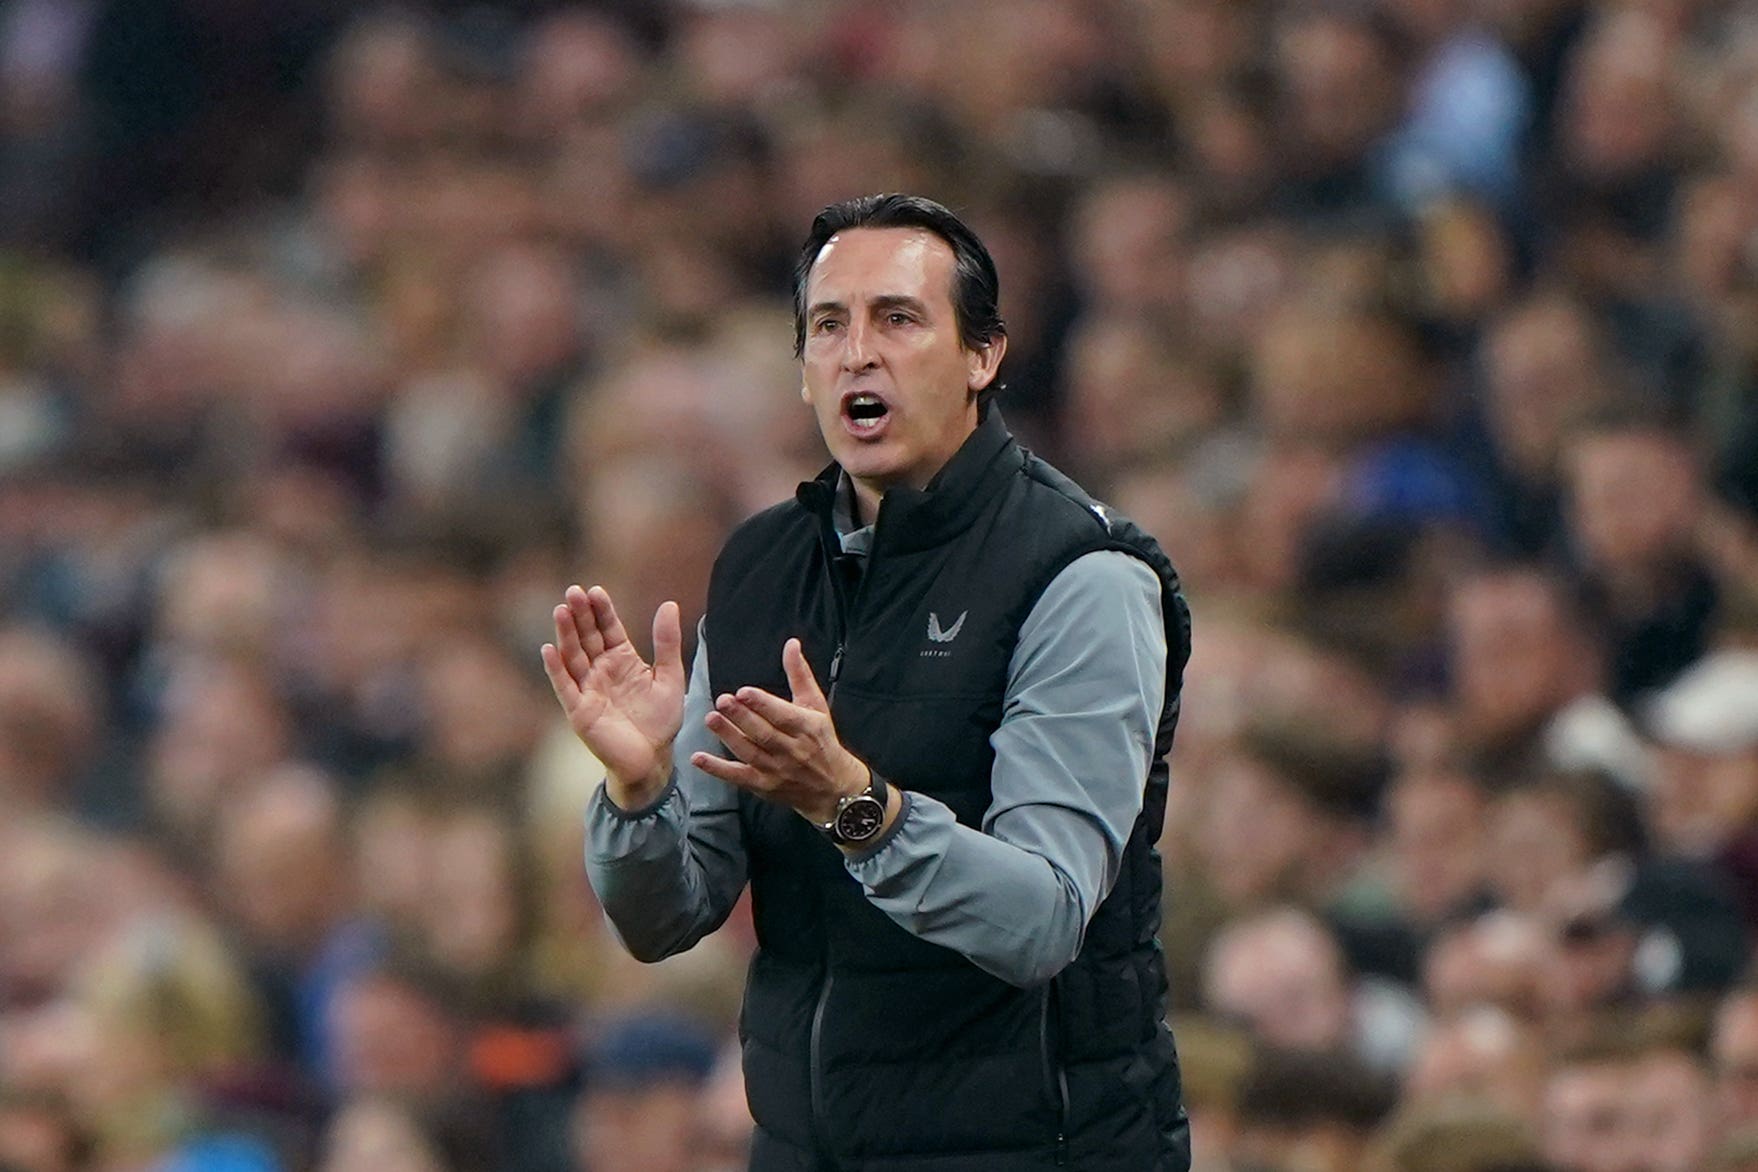 Unai Emery was delighted with Aston Villa advancing in Europe